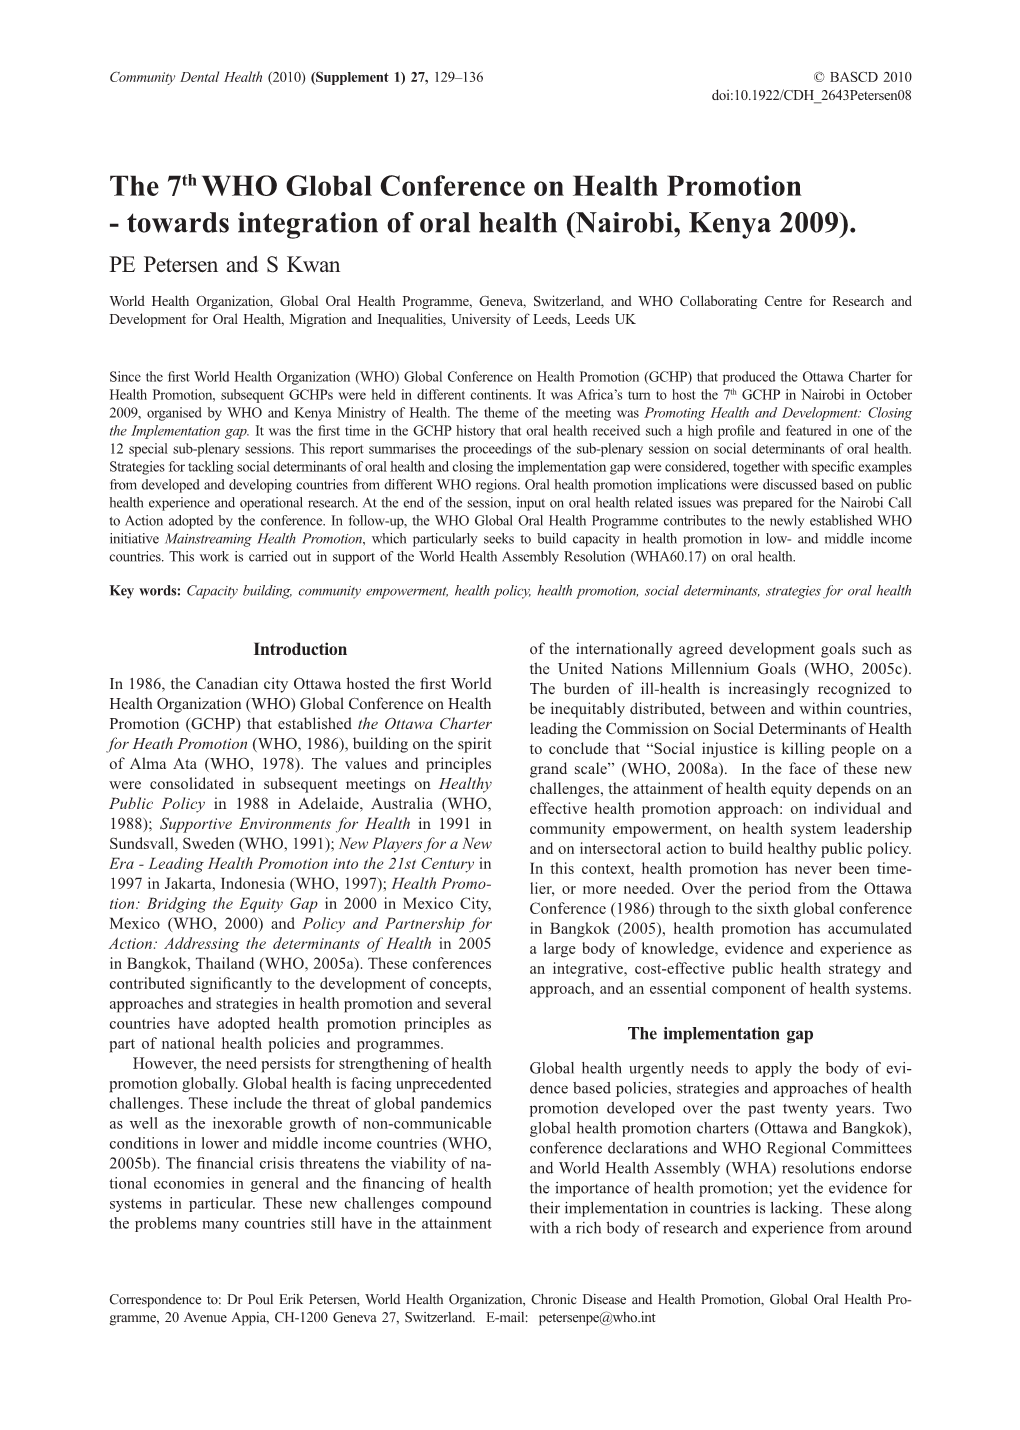 The 7Th WHO Global Conference on Health Promotion - Towards Integration of Oral Health (Nairobi, Kenya 2009)